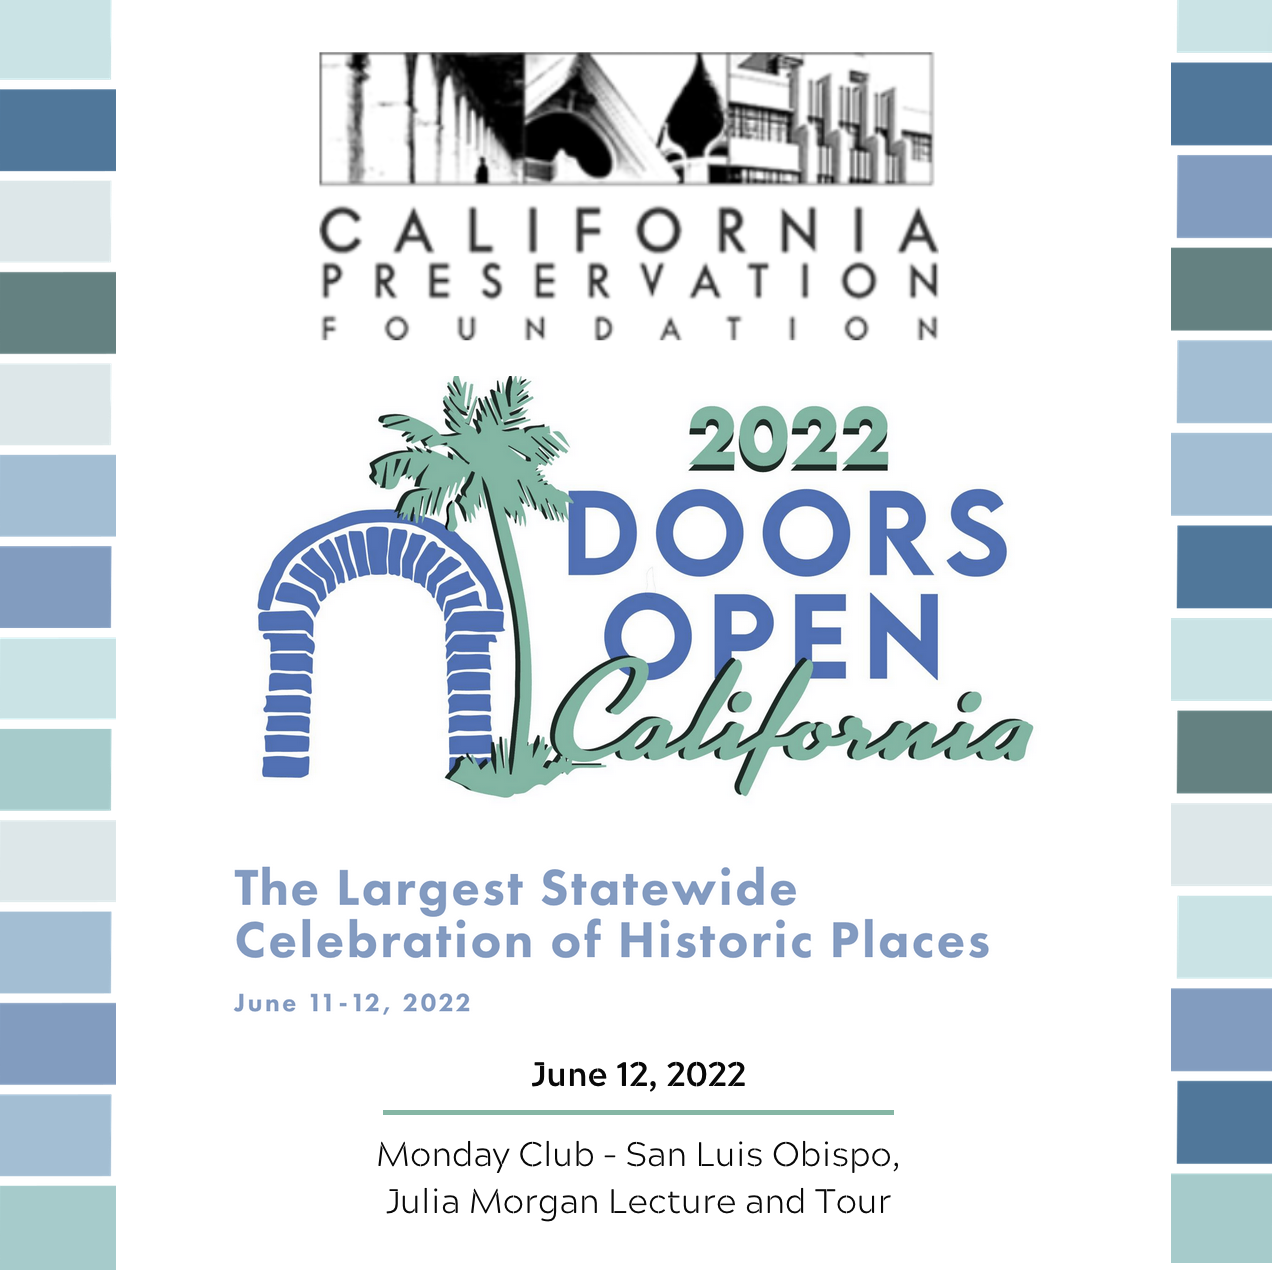 Doors Open California – Statewide Behind-the-Scenes Tours